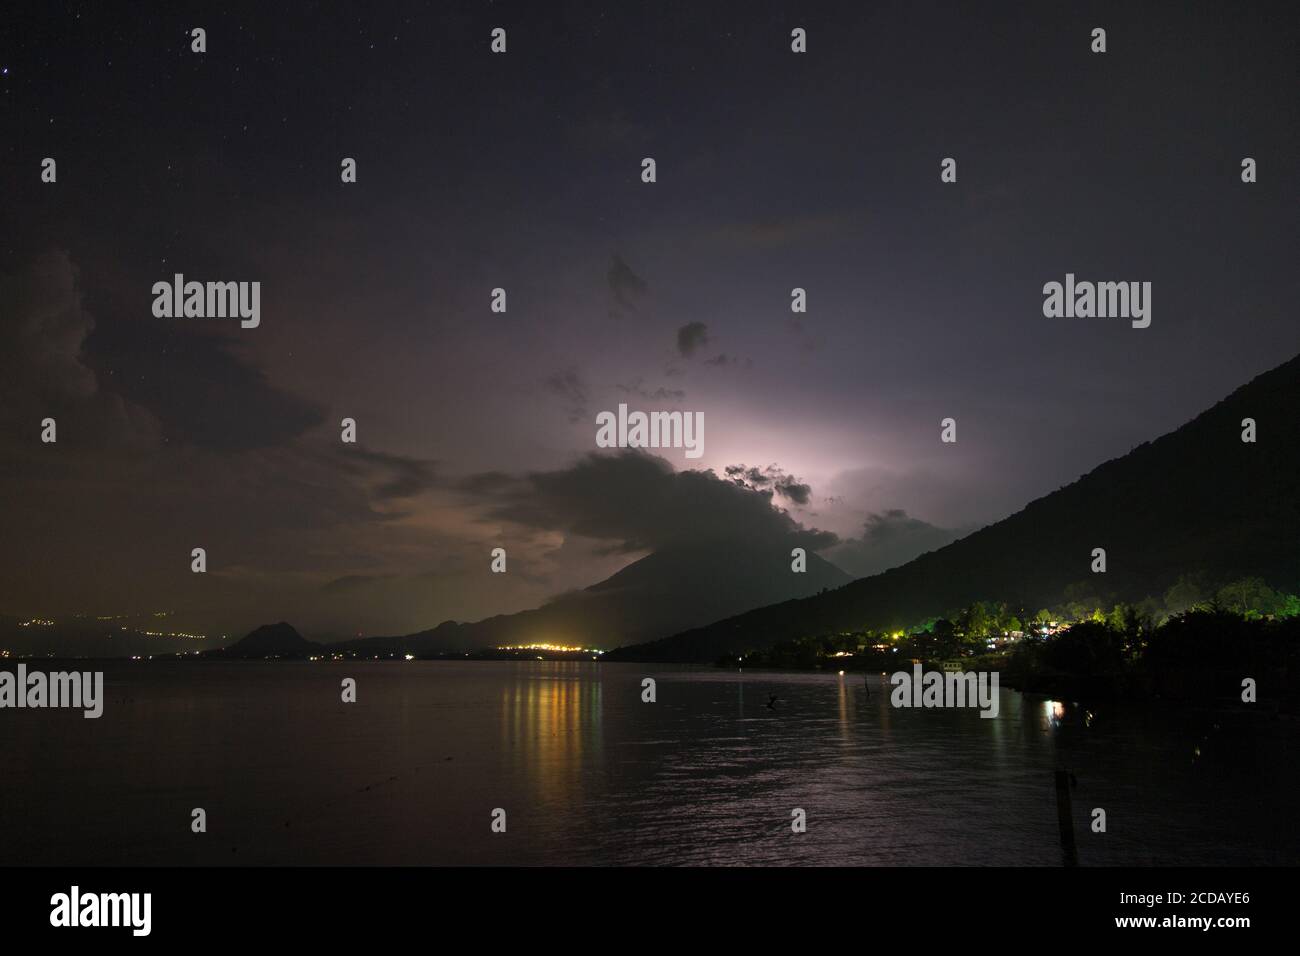 A lightning storm in the clouds over Toliman Volcano at night on Lake Atitlan, Guatemala.  Lake Atitlan is an ancient volcanic caldera or crater, fill Stock Photo